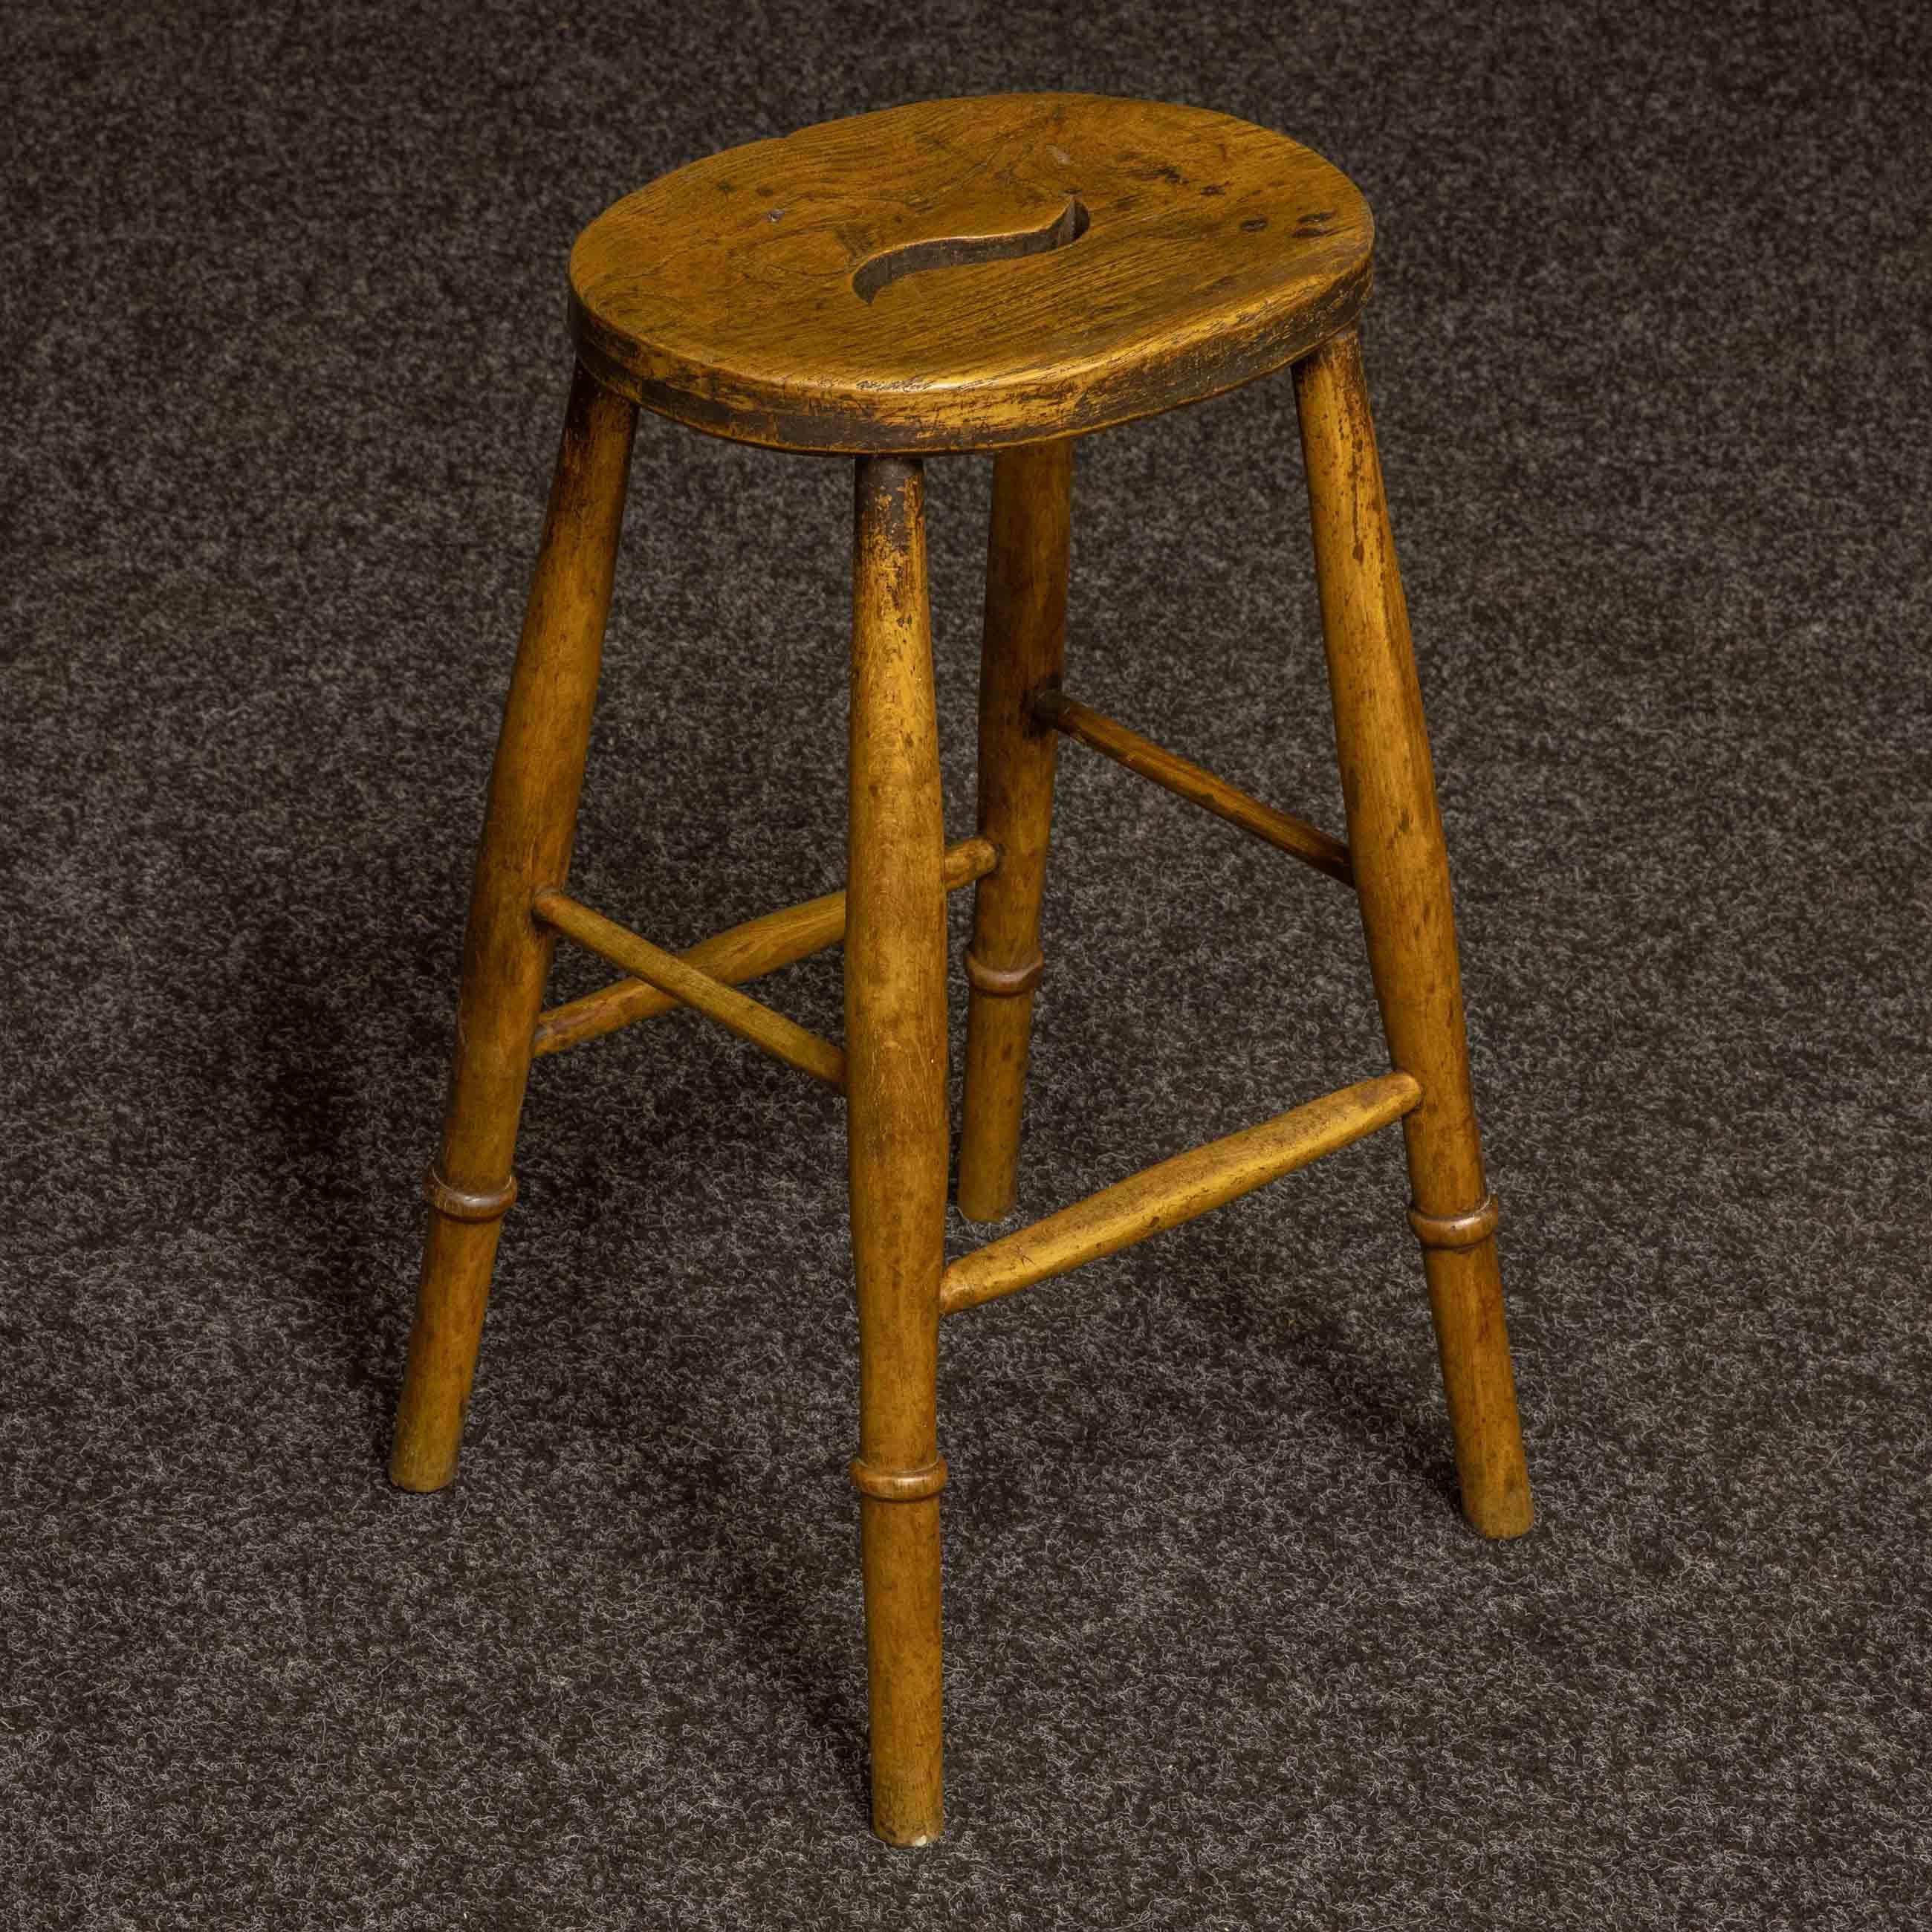 A good set of three Victorian stools with beautiful elm seats and curved hand grips.